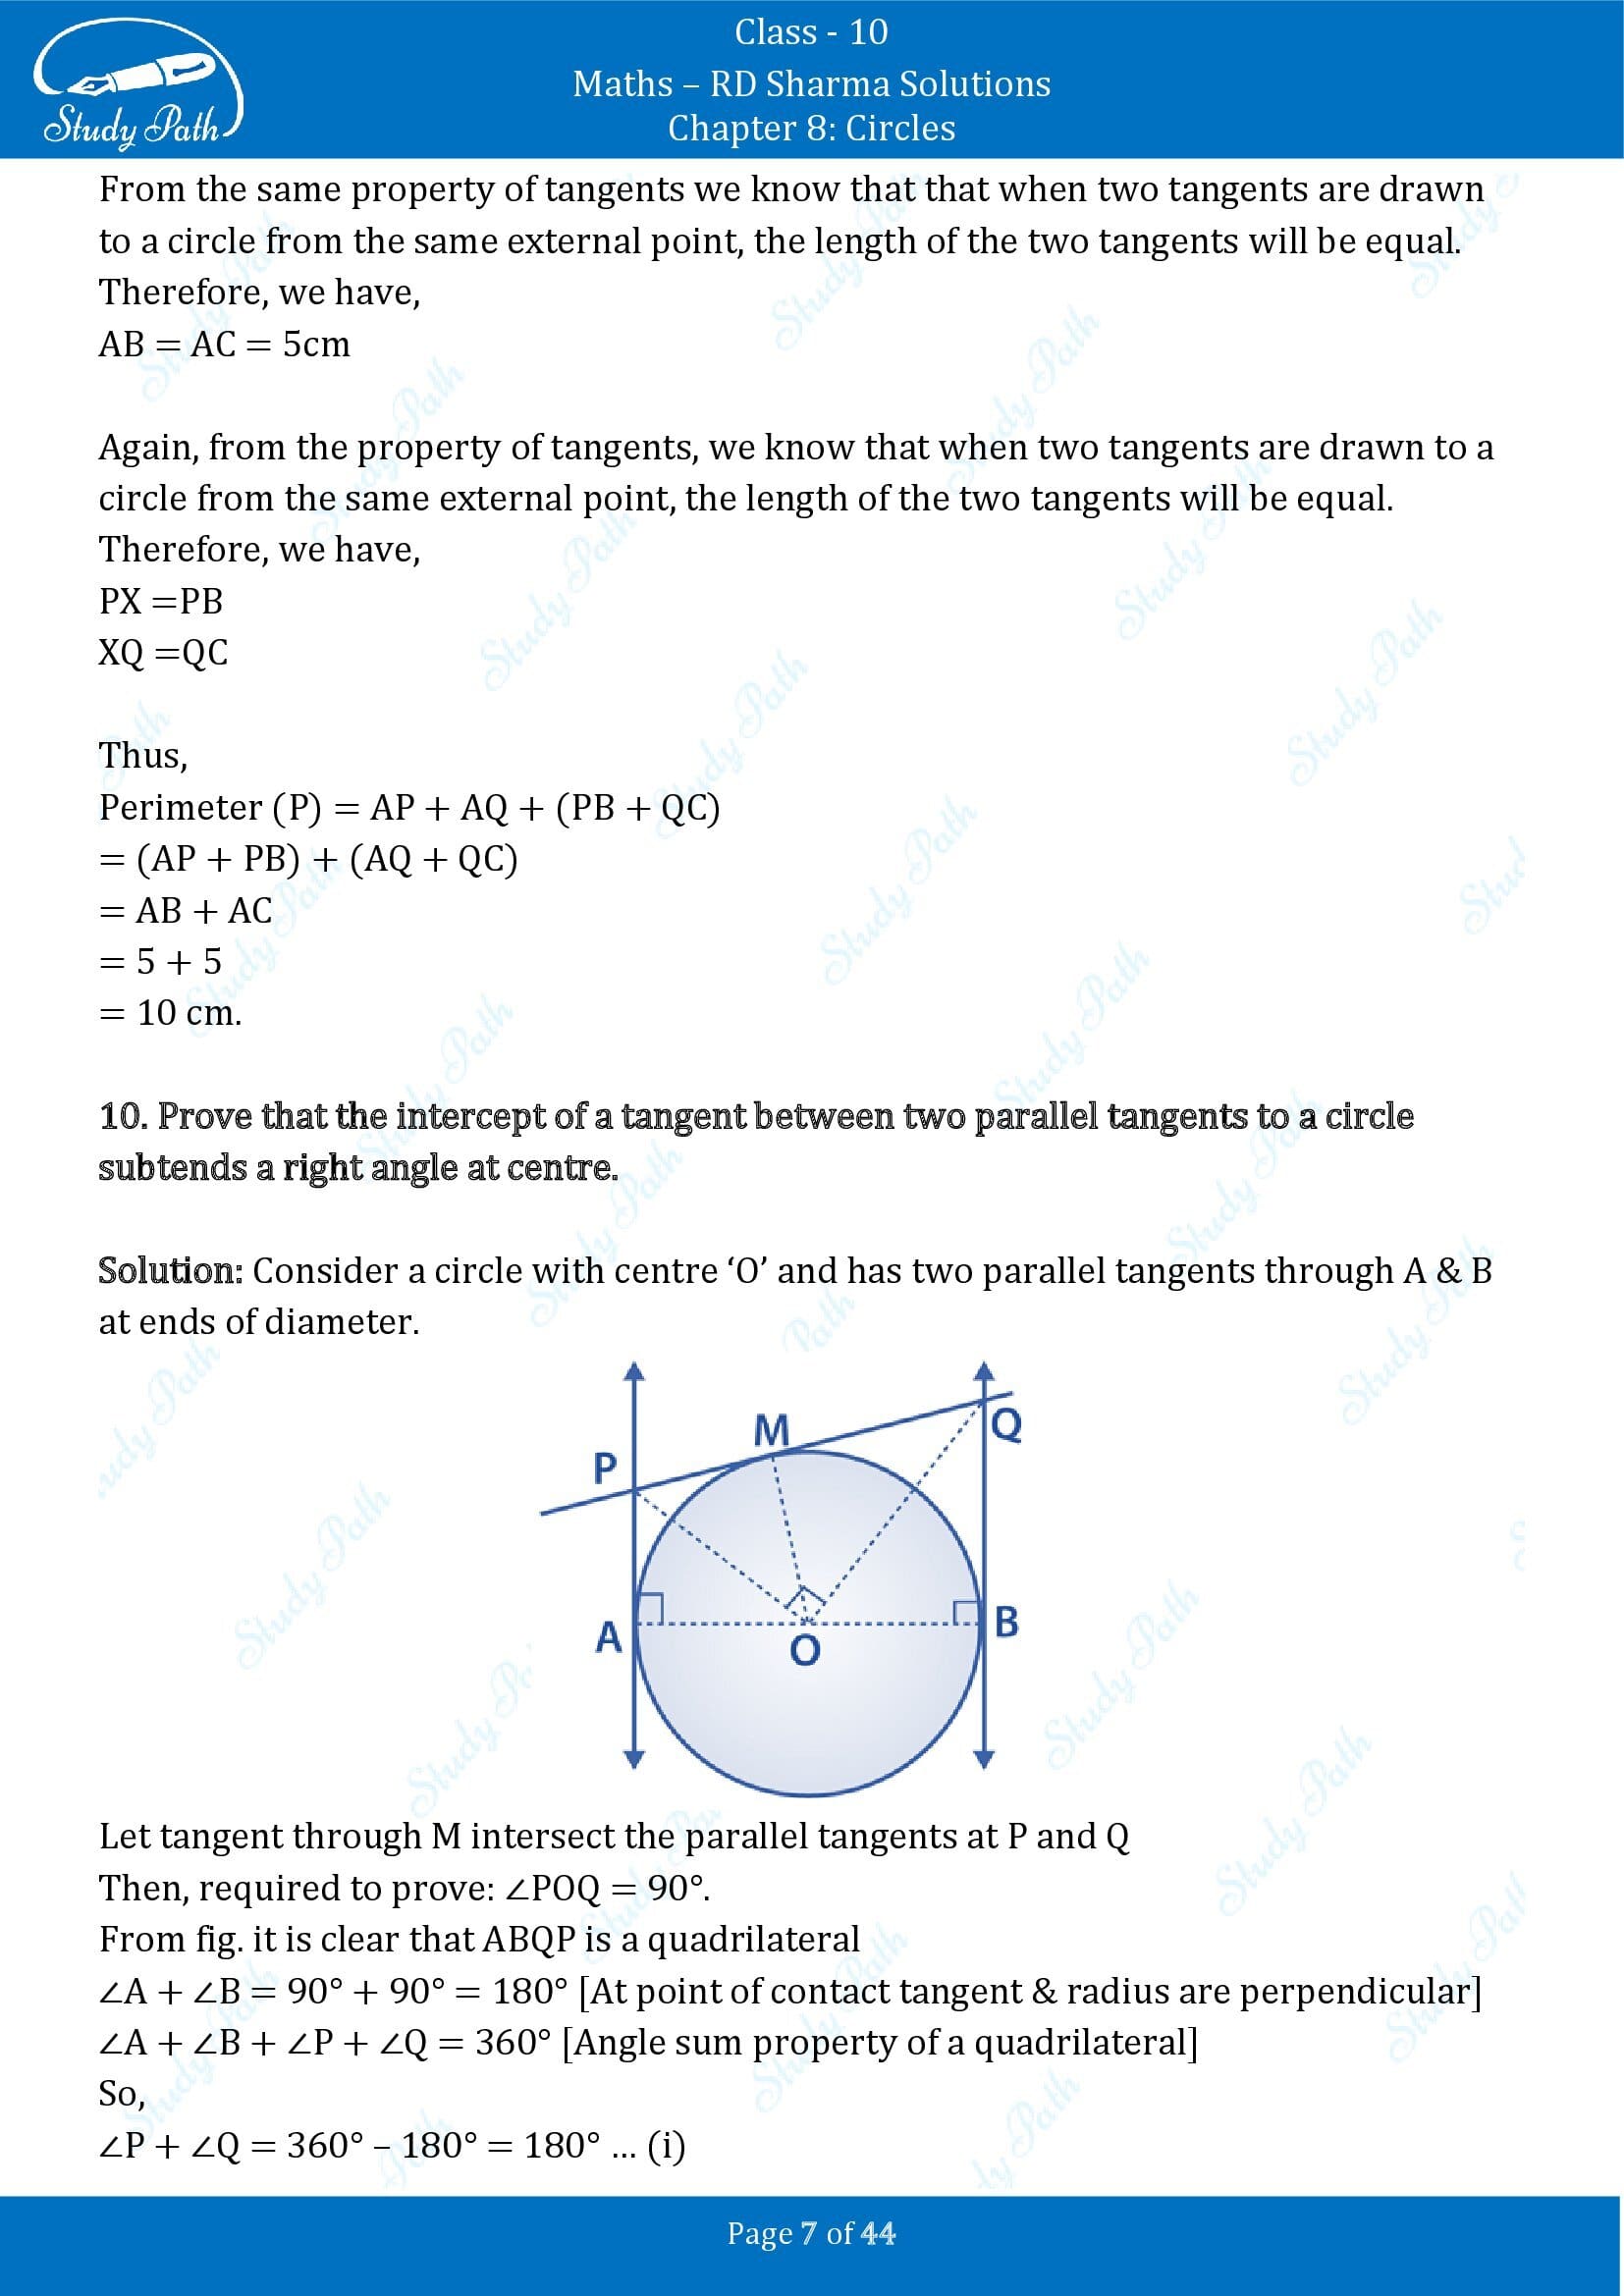 RD Sharma Solutions Class 10 Chapter 8 Circles Exercise 8.2 00007